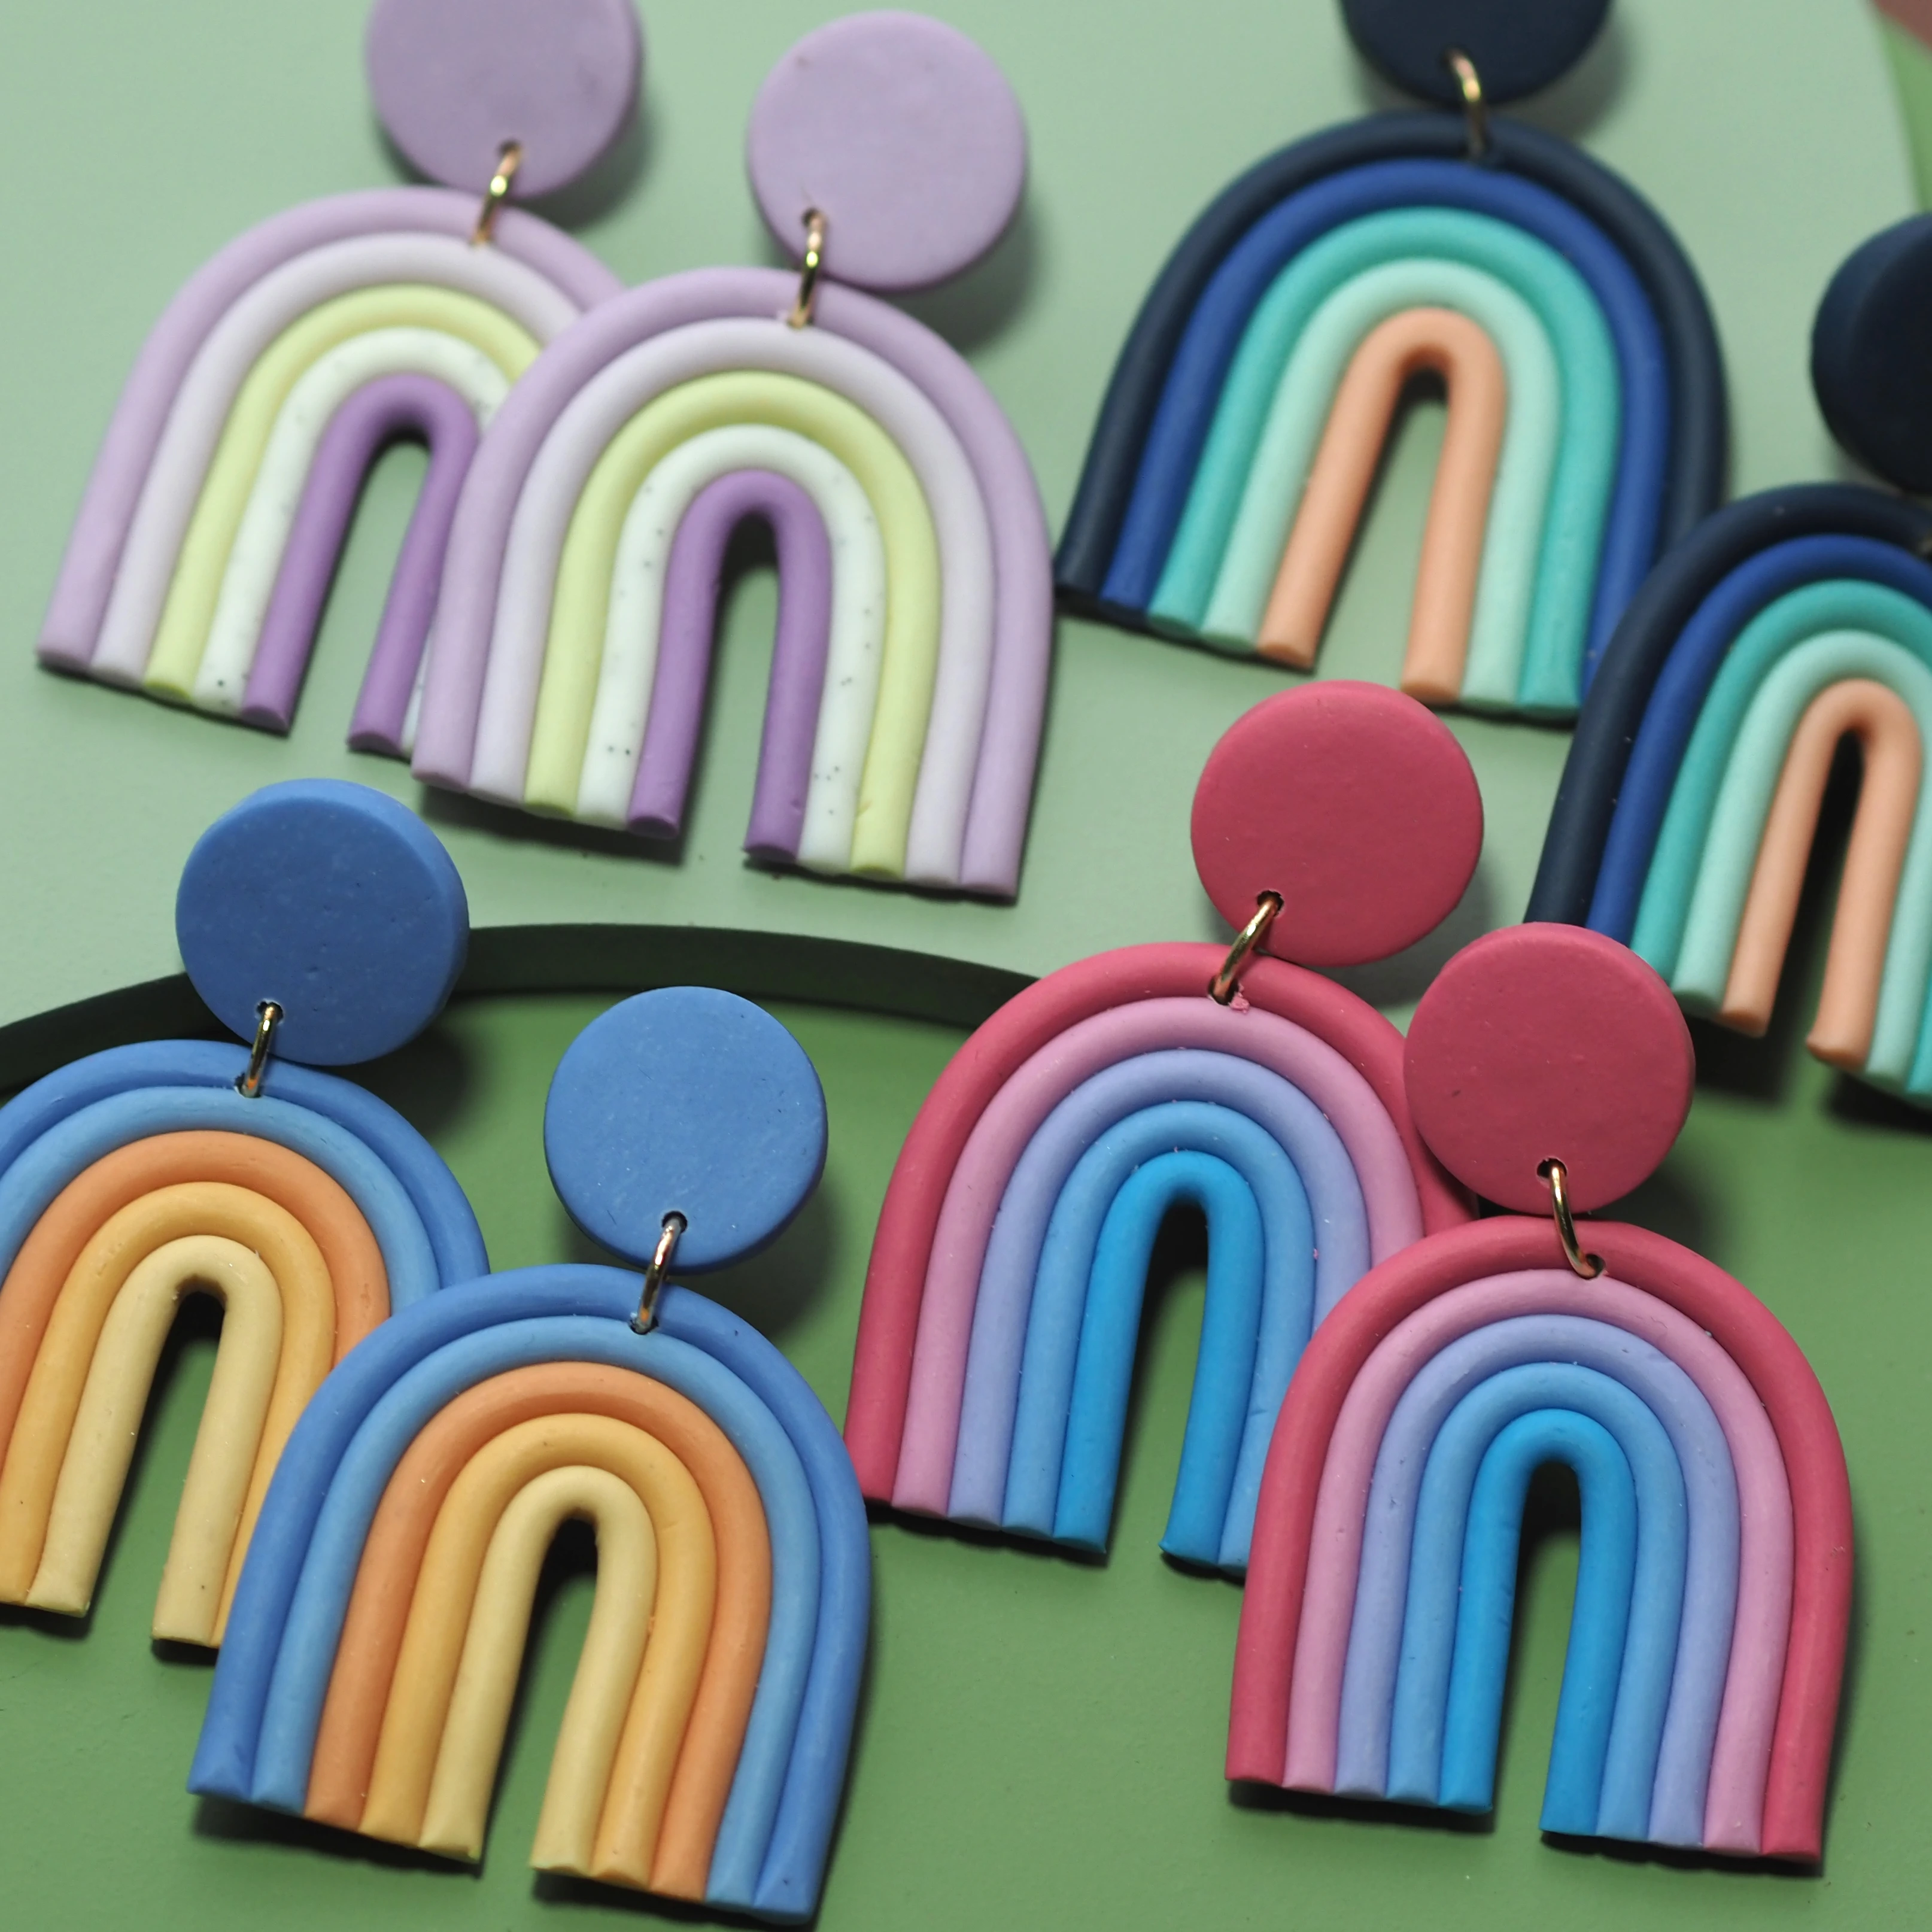 Rainbow Colors U Shape Fashion Jewelry Unusual Hanging Cute Polymer Clay Earrings Sets Gift For Women Goth 2021 Trendy Jewelry